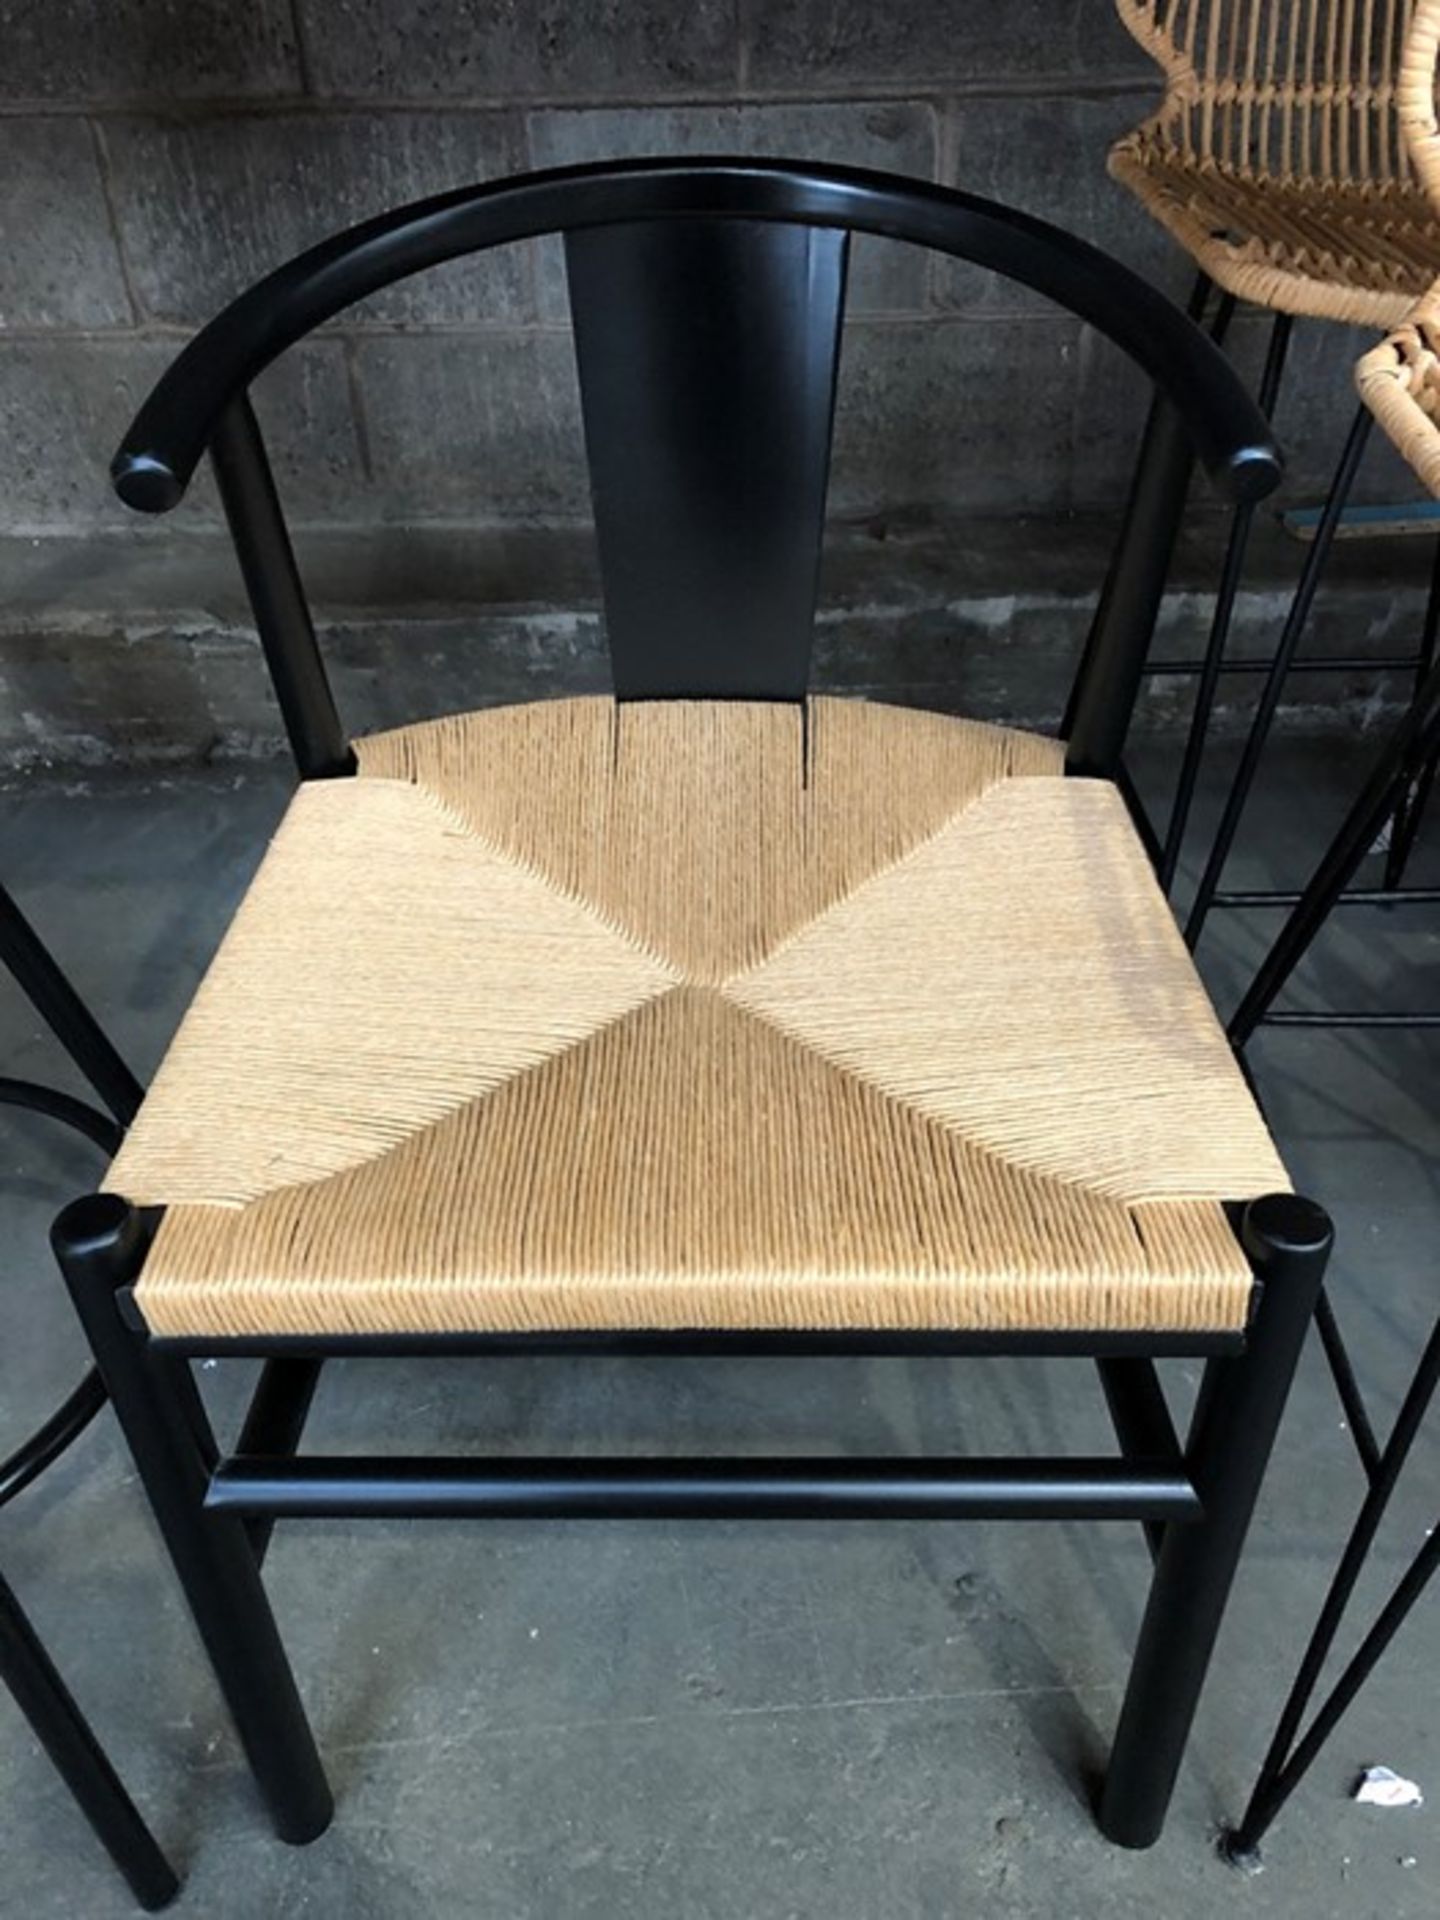 1 BESPOKE DESIGNER WOODEN CHAIR IN BEECH AND BLACK (PUBLIC VIEWING AVAILABLE)